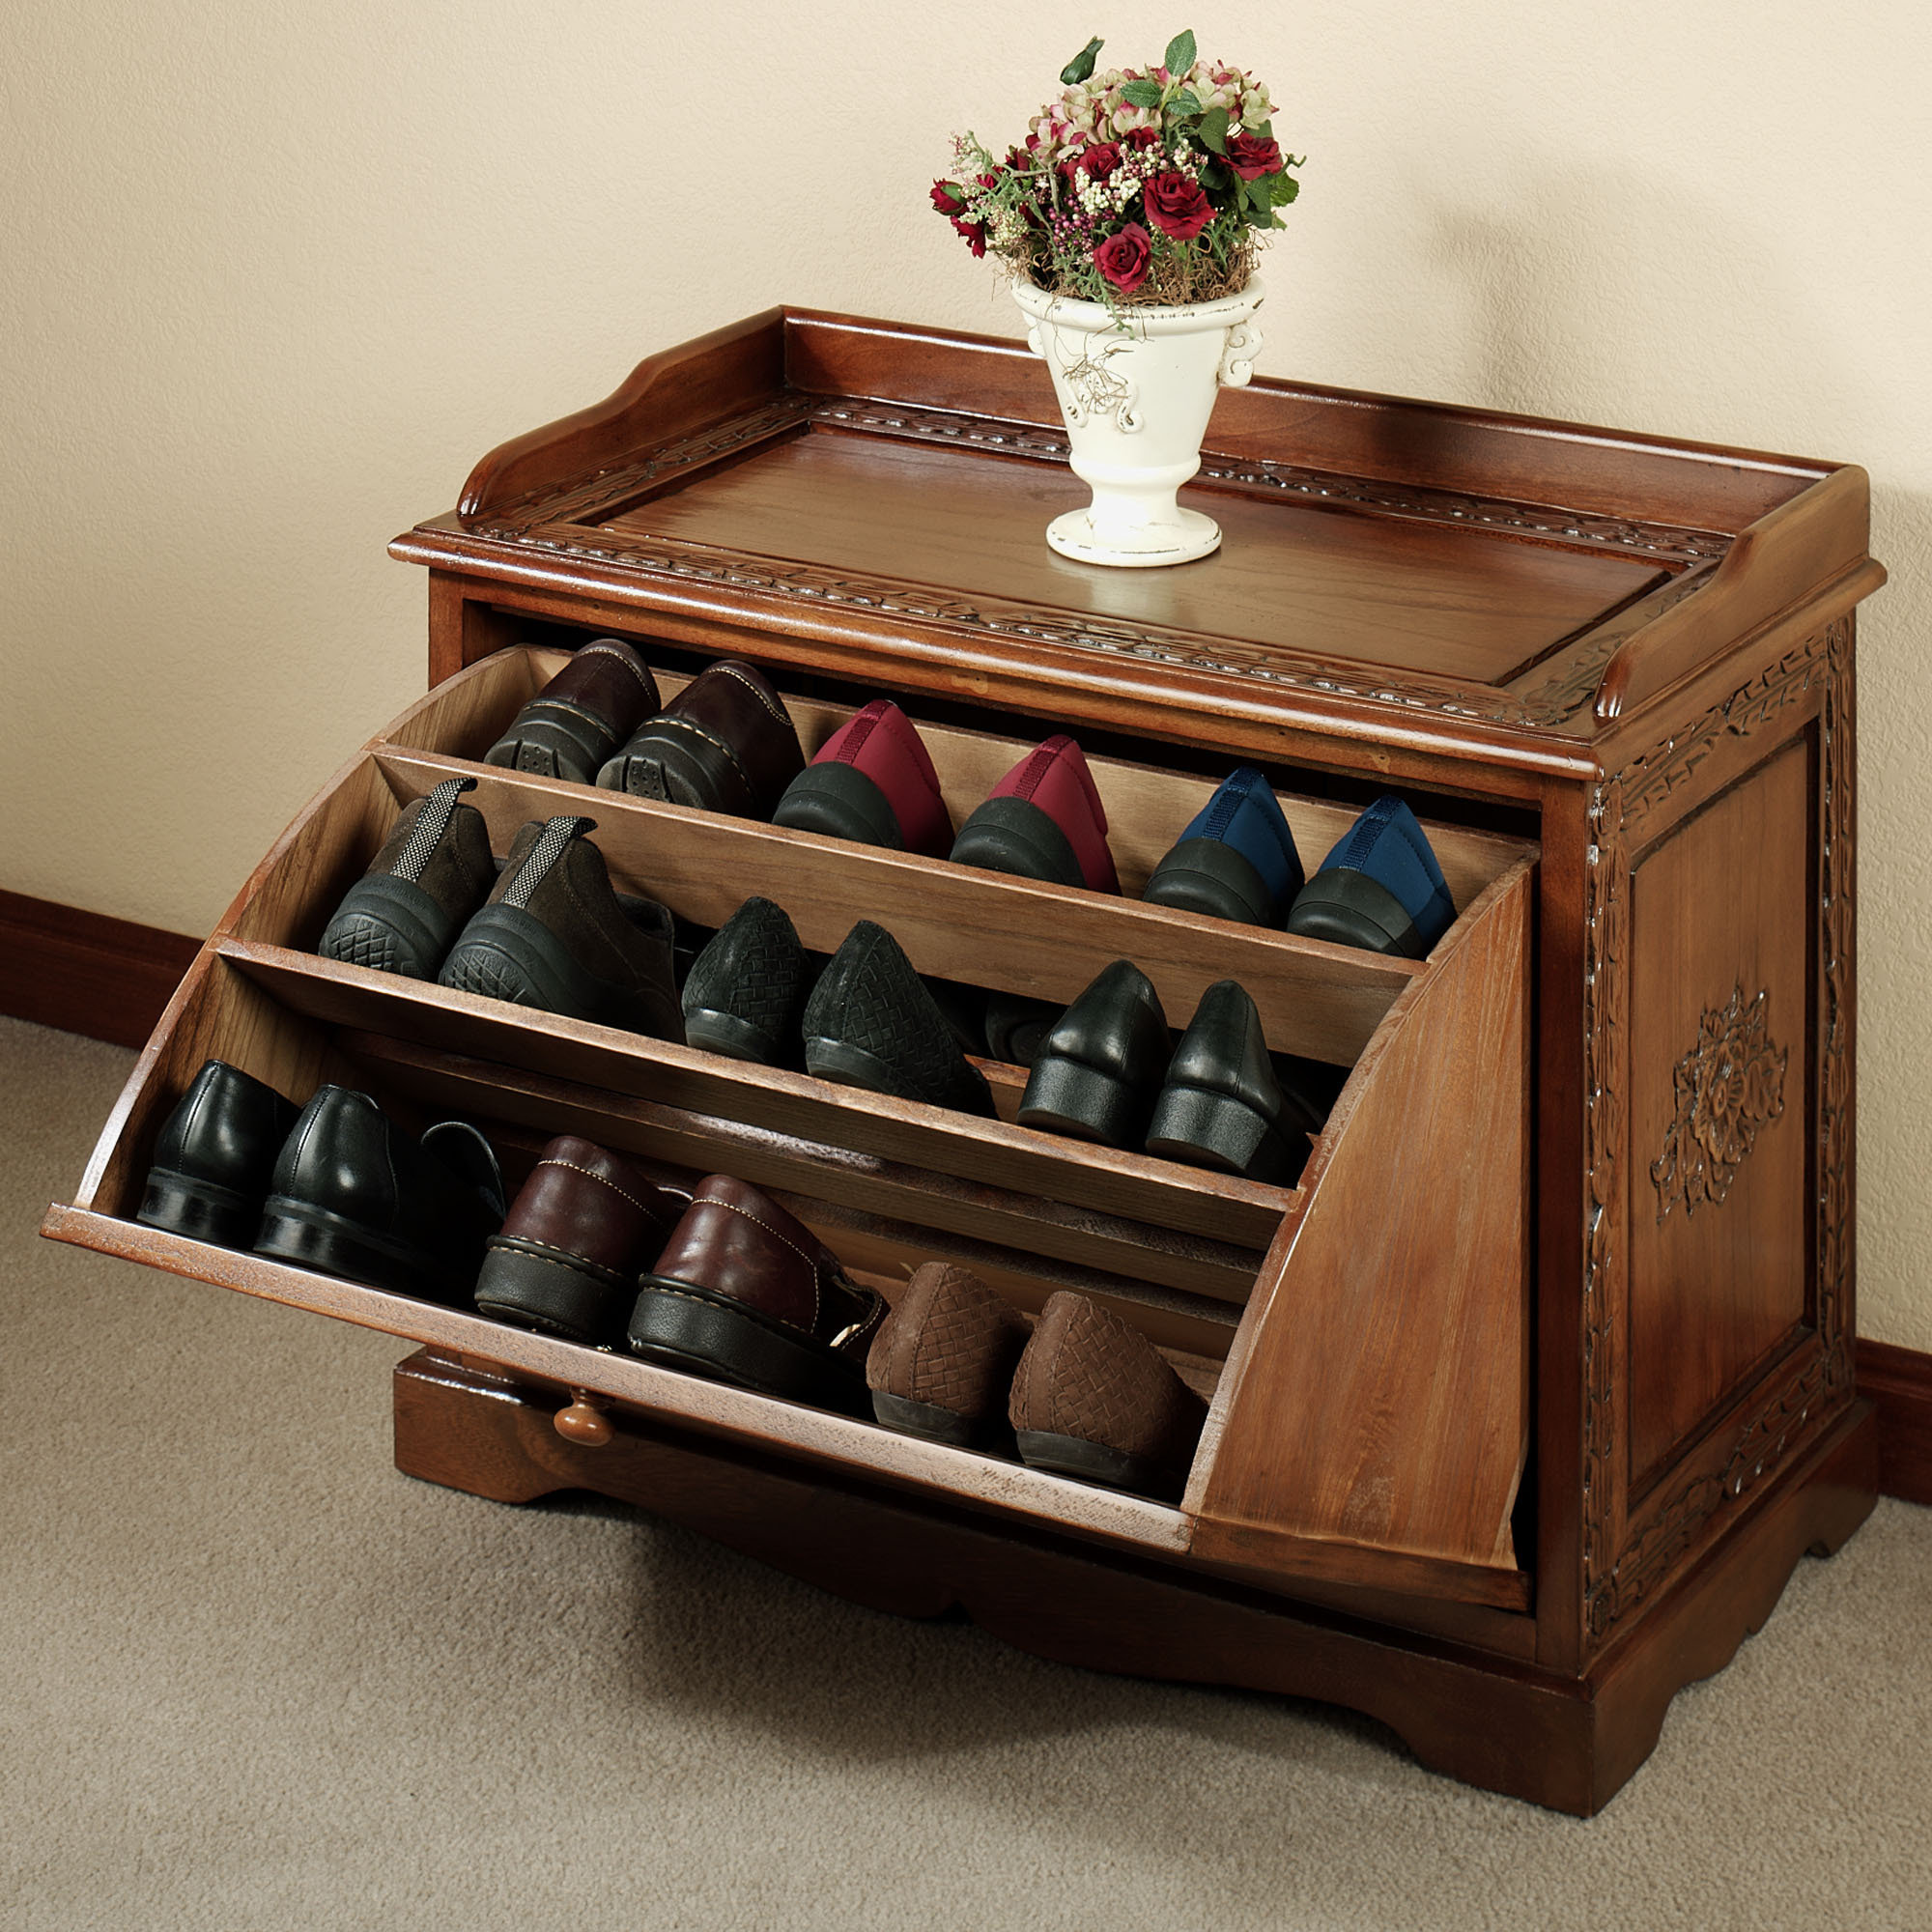 Old And Vintage Closed Shoe Rack With Drawer Storage Stand Ideas